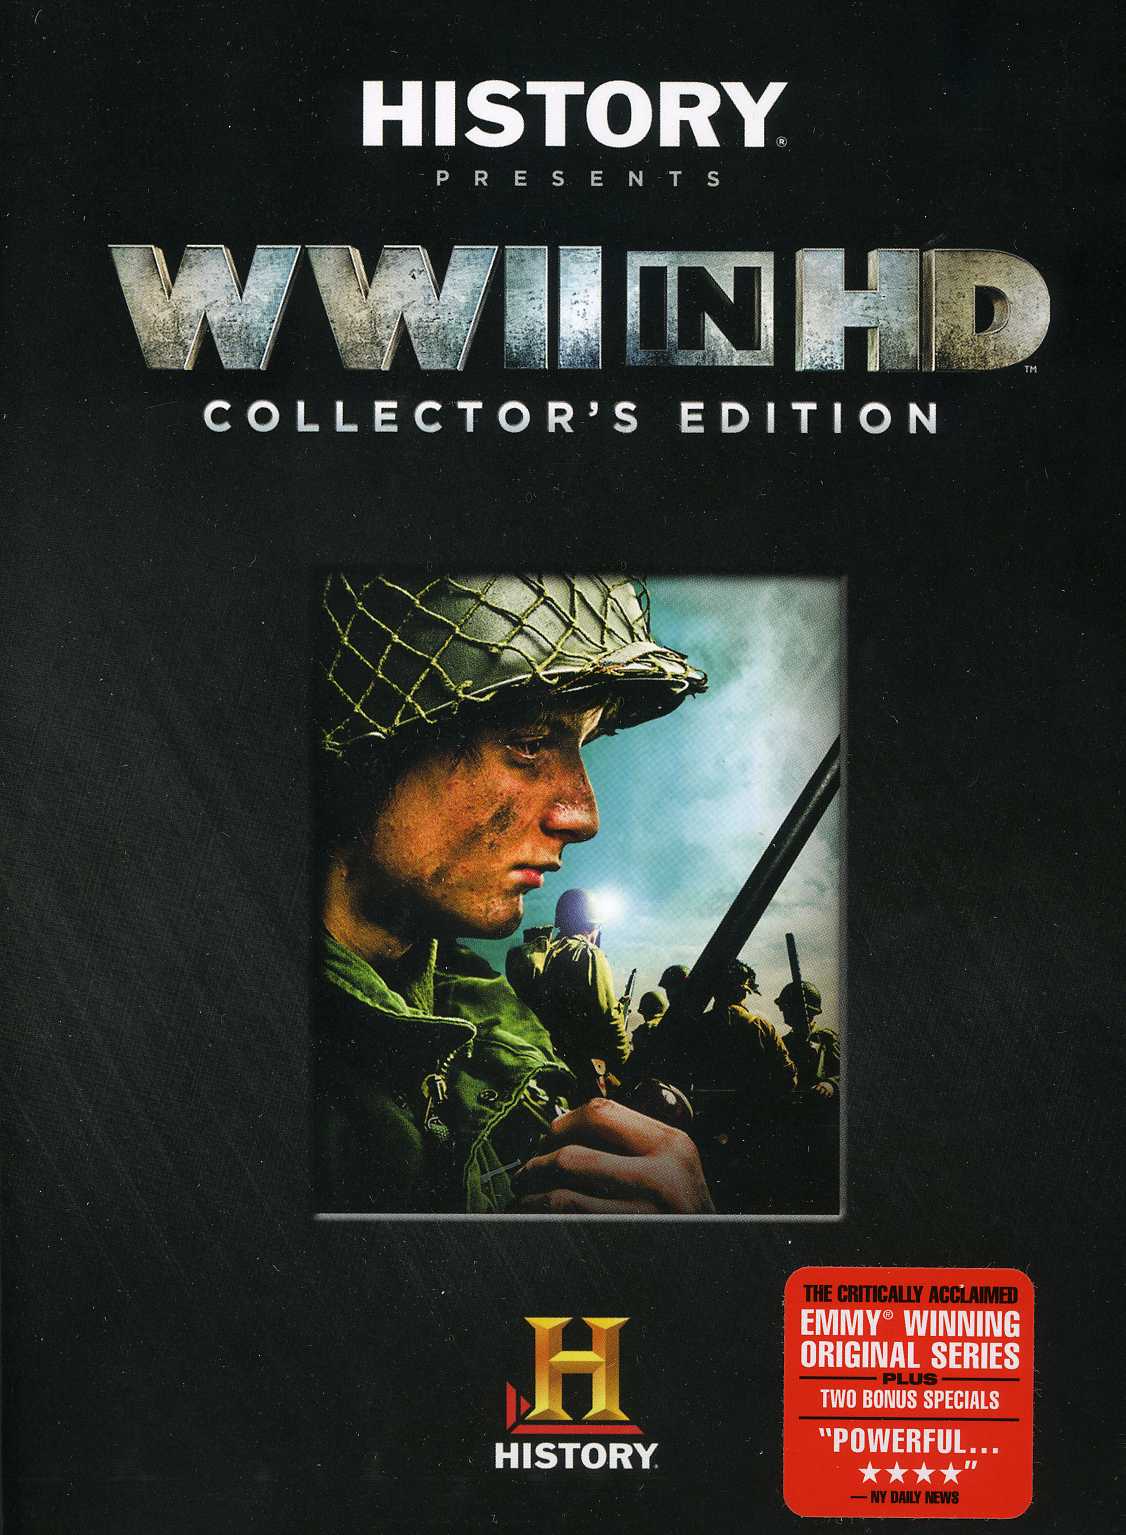 WWII IN HD: COLLECTORS EDITION (5PC) / (BOX COLL)